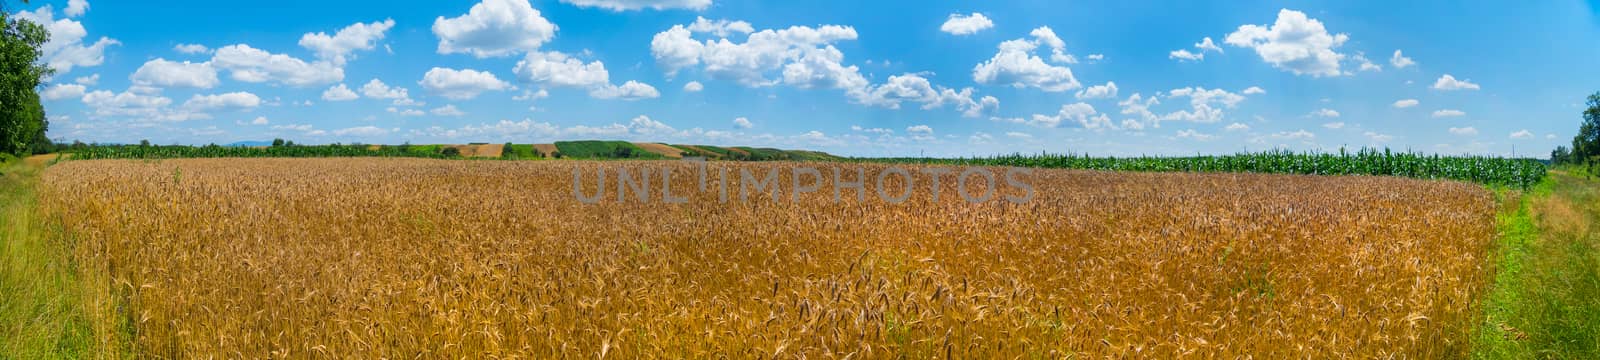 Golden ears of wheat under the endless blue of the heavenly ocean by Adamchuk